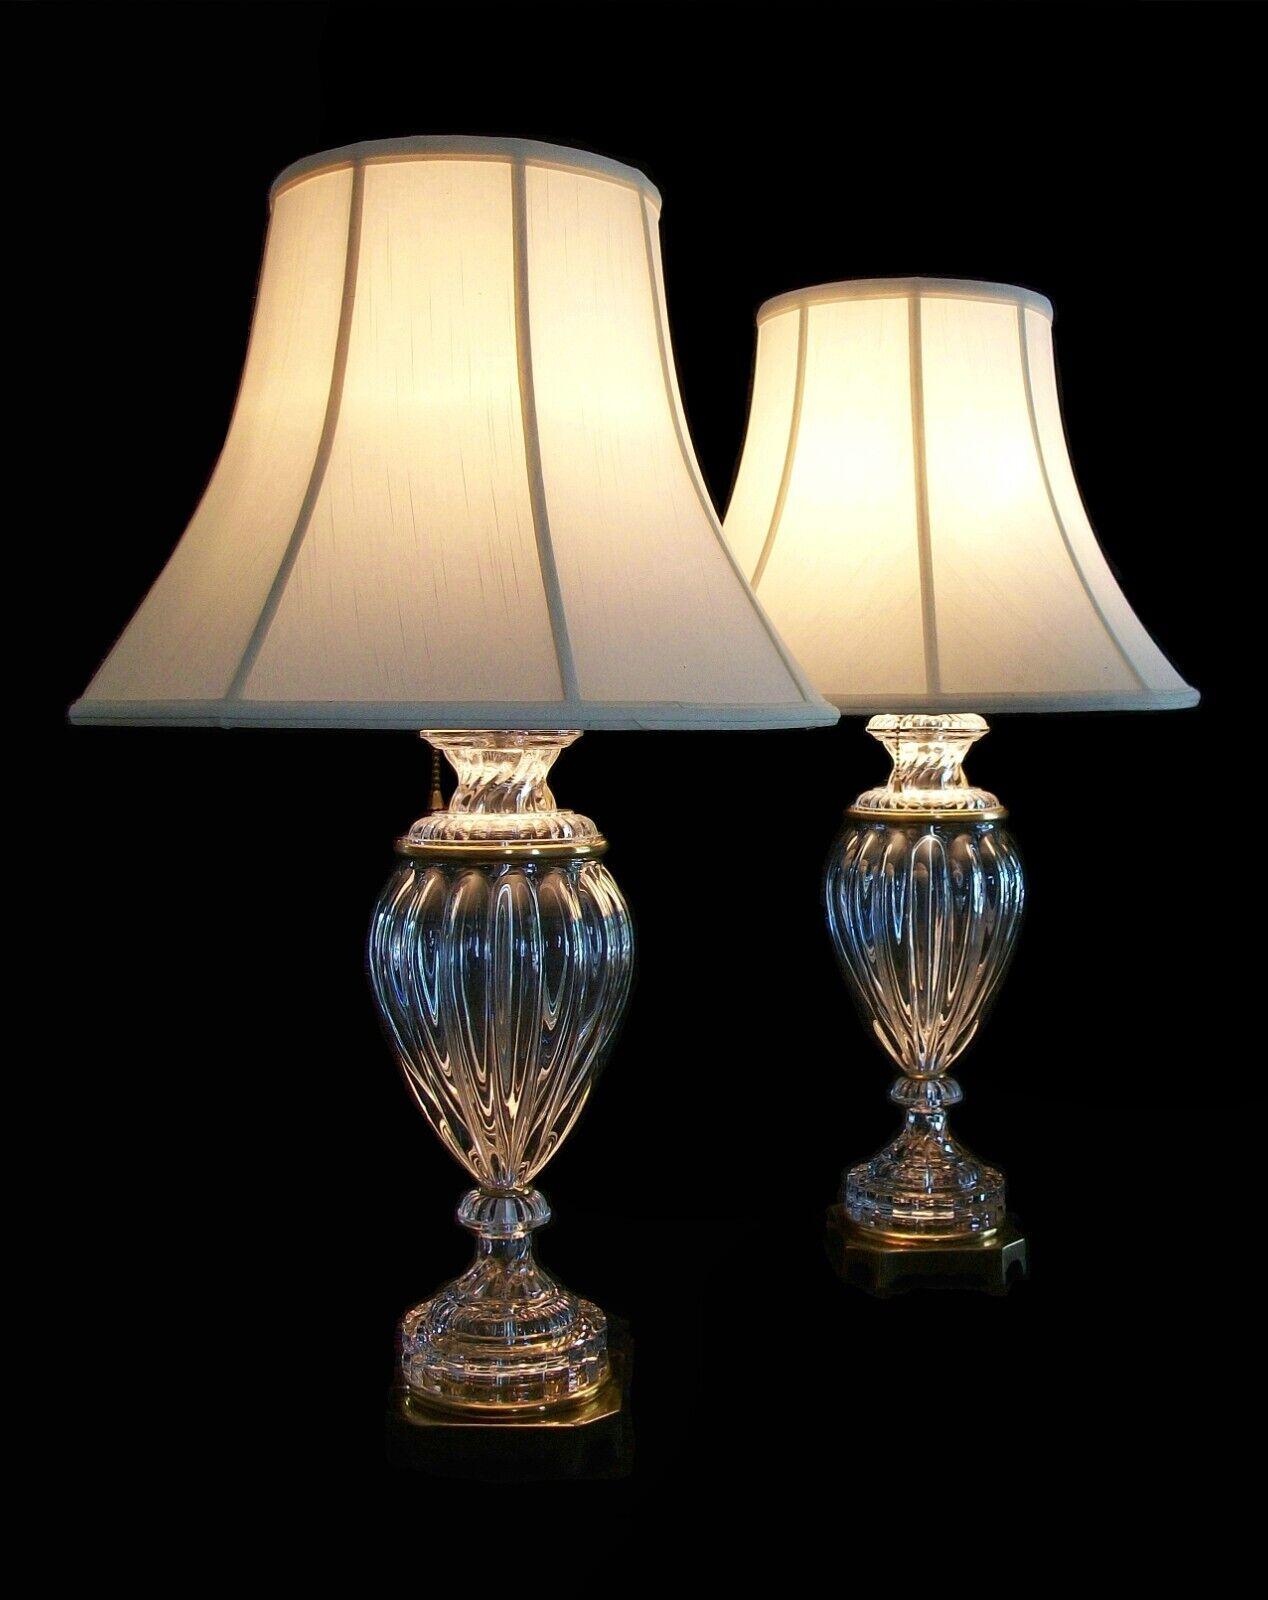 Paul Hanson - vintage pair of Baccarat style glass and brass table lamps - large size - featuring twisted and fluted glass bodies - solid brass bases - pull chain switches - vintage original bell shaped faux silk shantung shades - unsigned - United